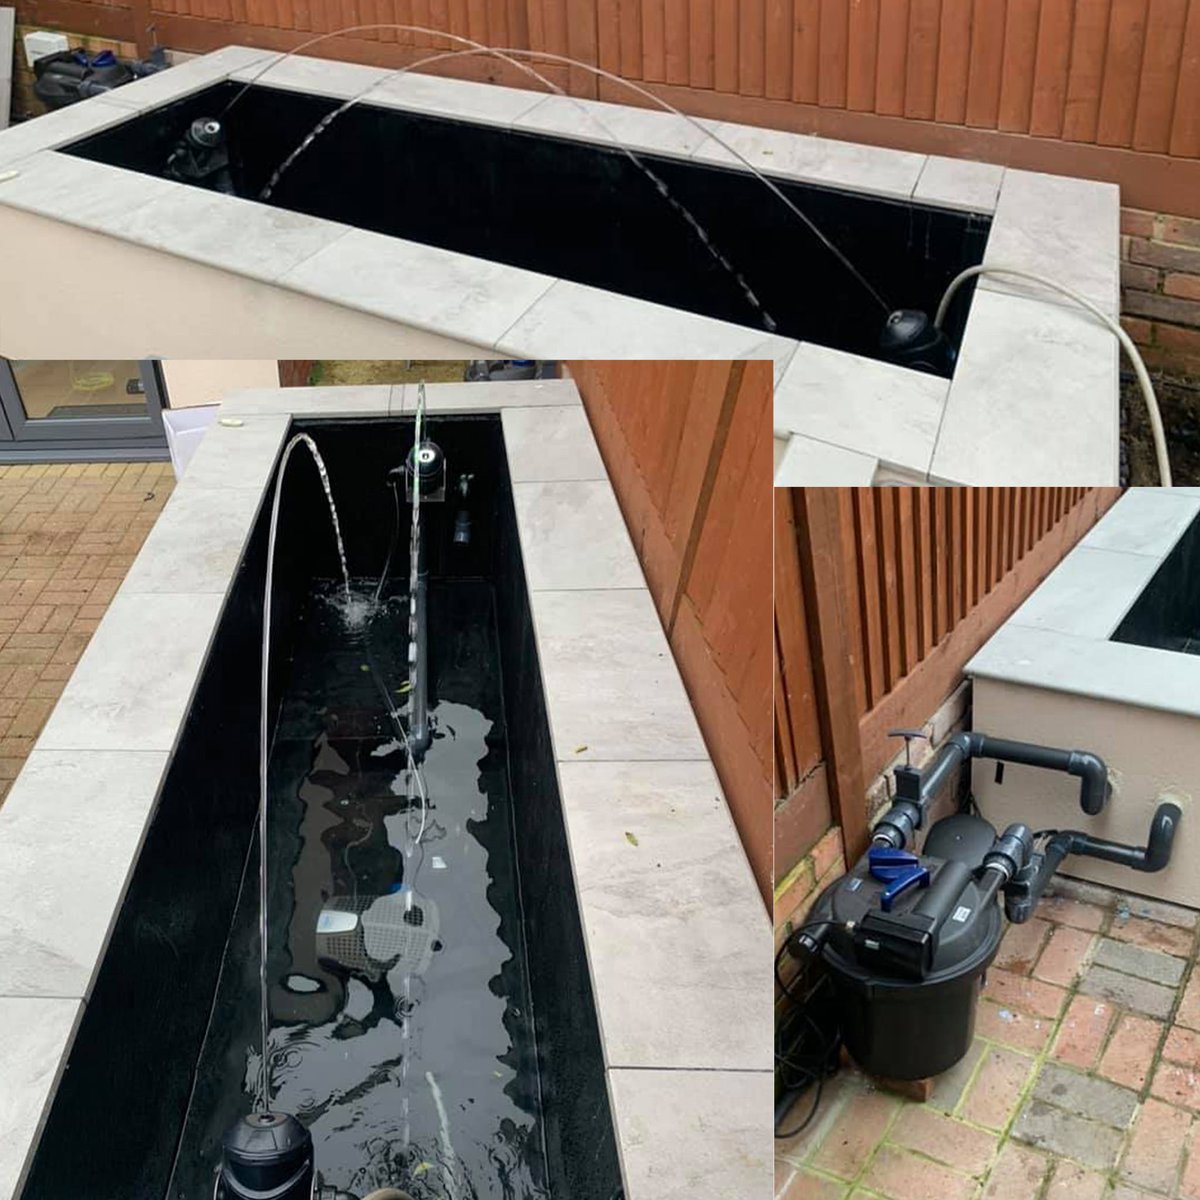 The team at JR Aqua Landscapes shared this small fountain pool, designed by Aquatics Applied and packed with OASE equipment, provided by Water Garden Ltd. It includes a filter set and our Water Jet Lighting Set. Follow their page here: bit.ly/2XLJxUh